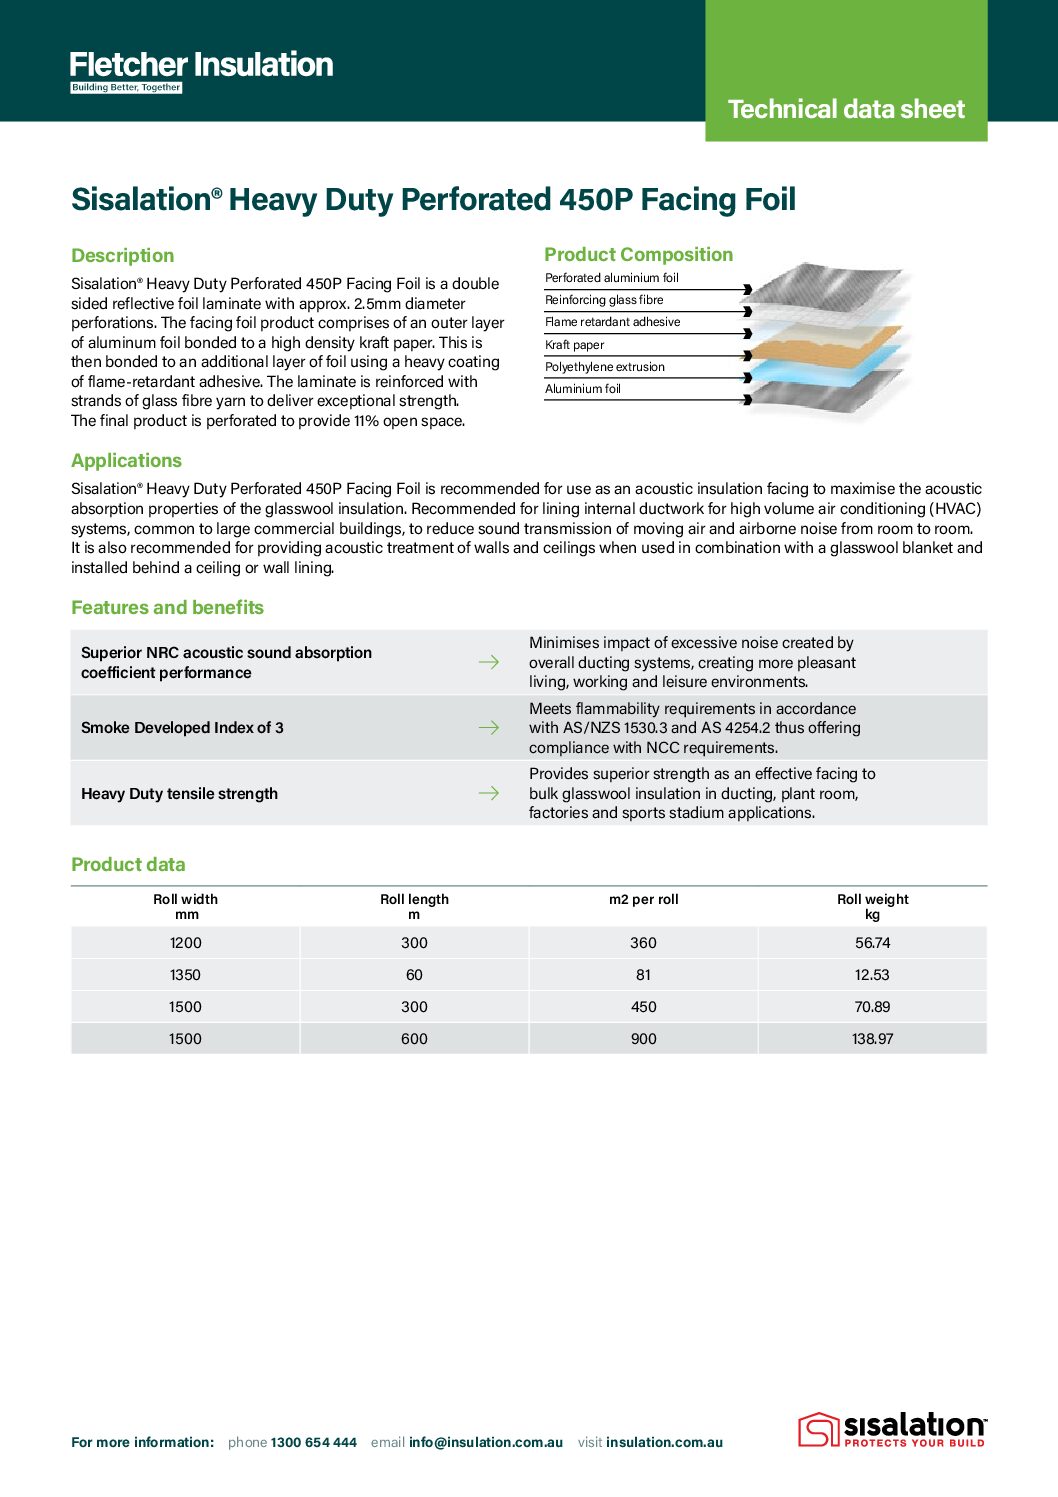 Sisalation® Heavy Duty Perforated 450P Technical Data Sheet